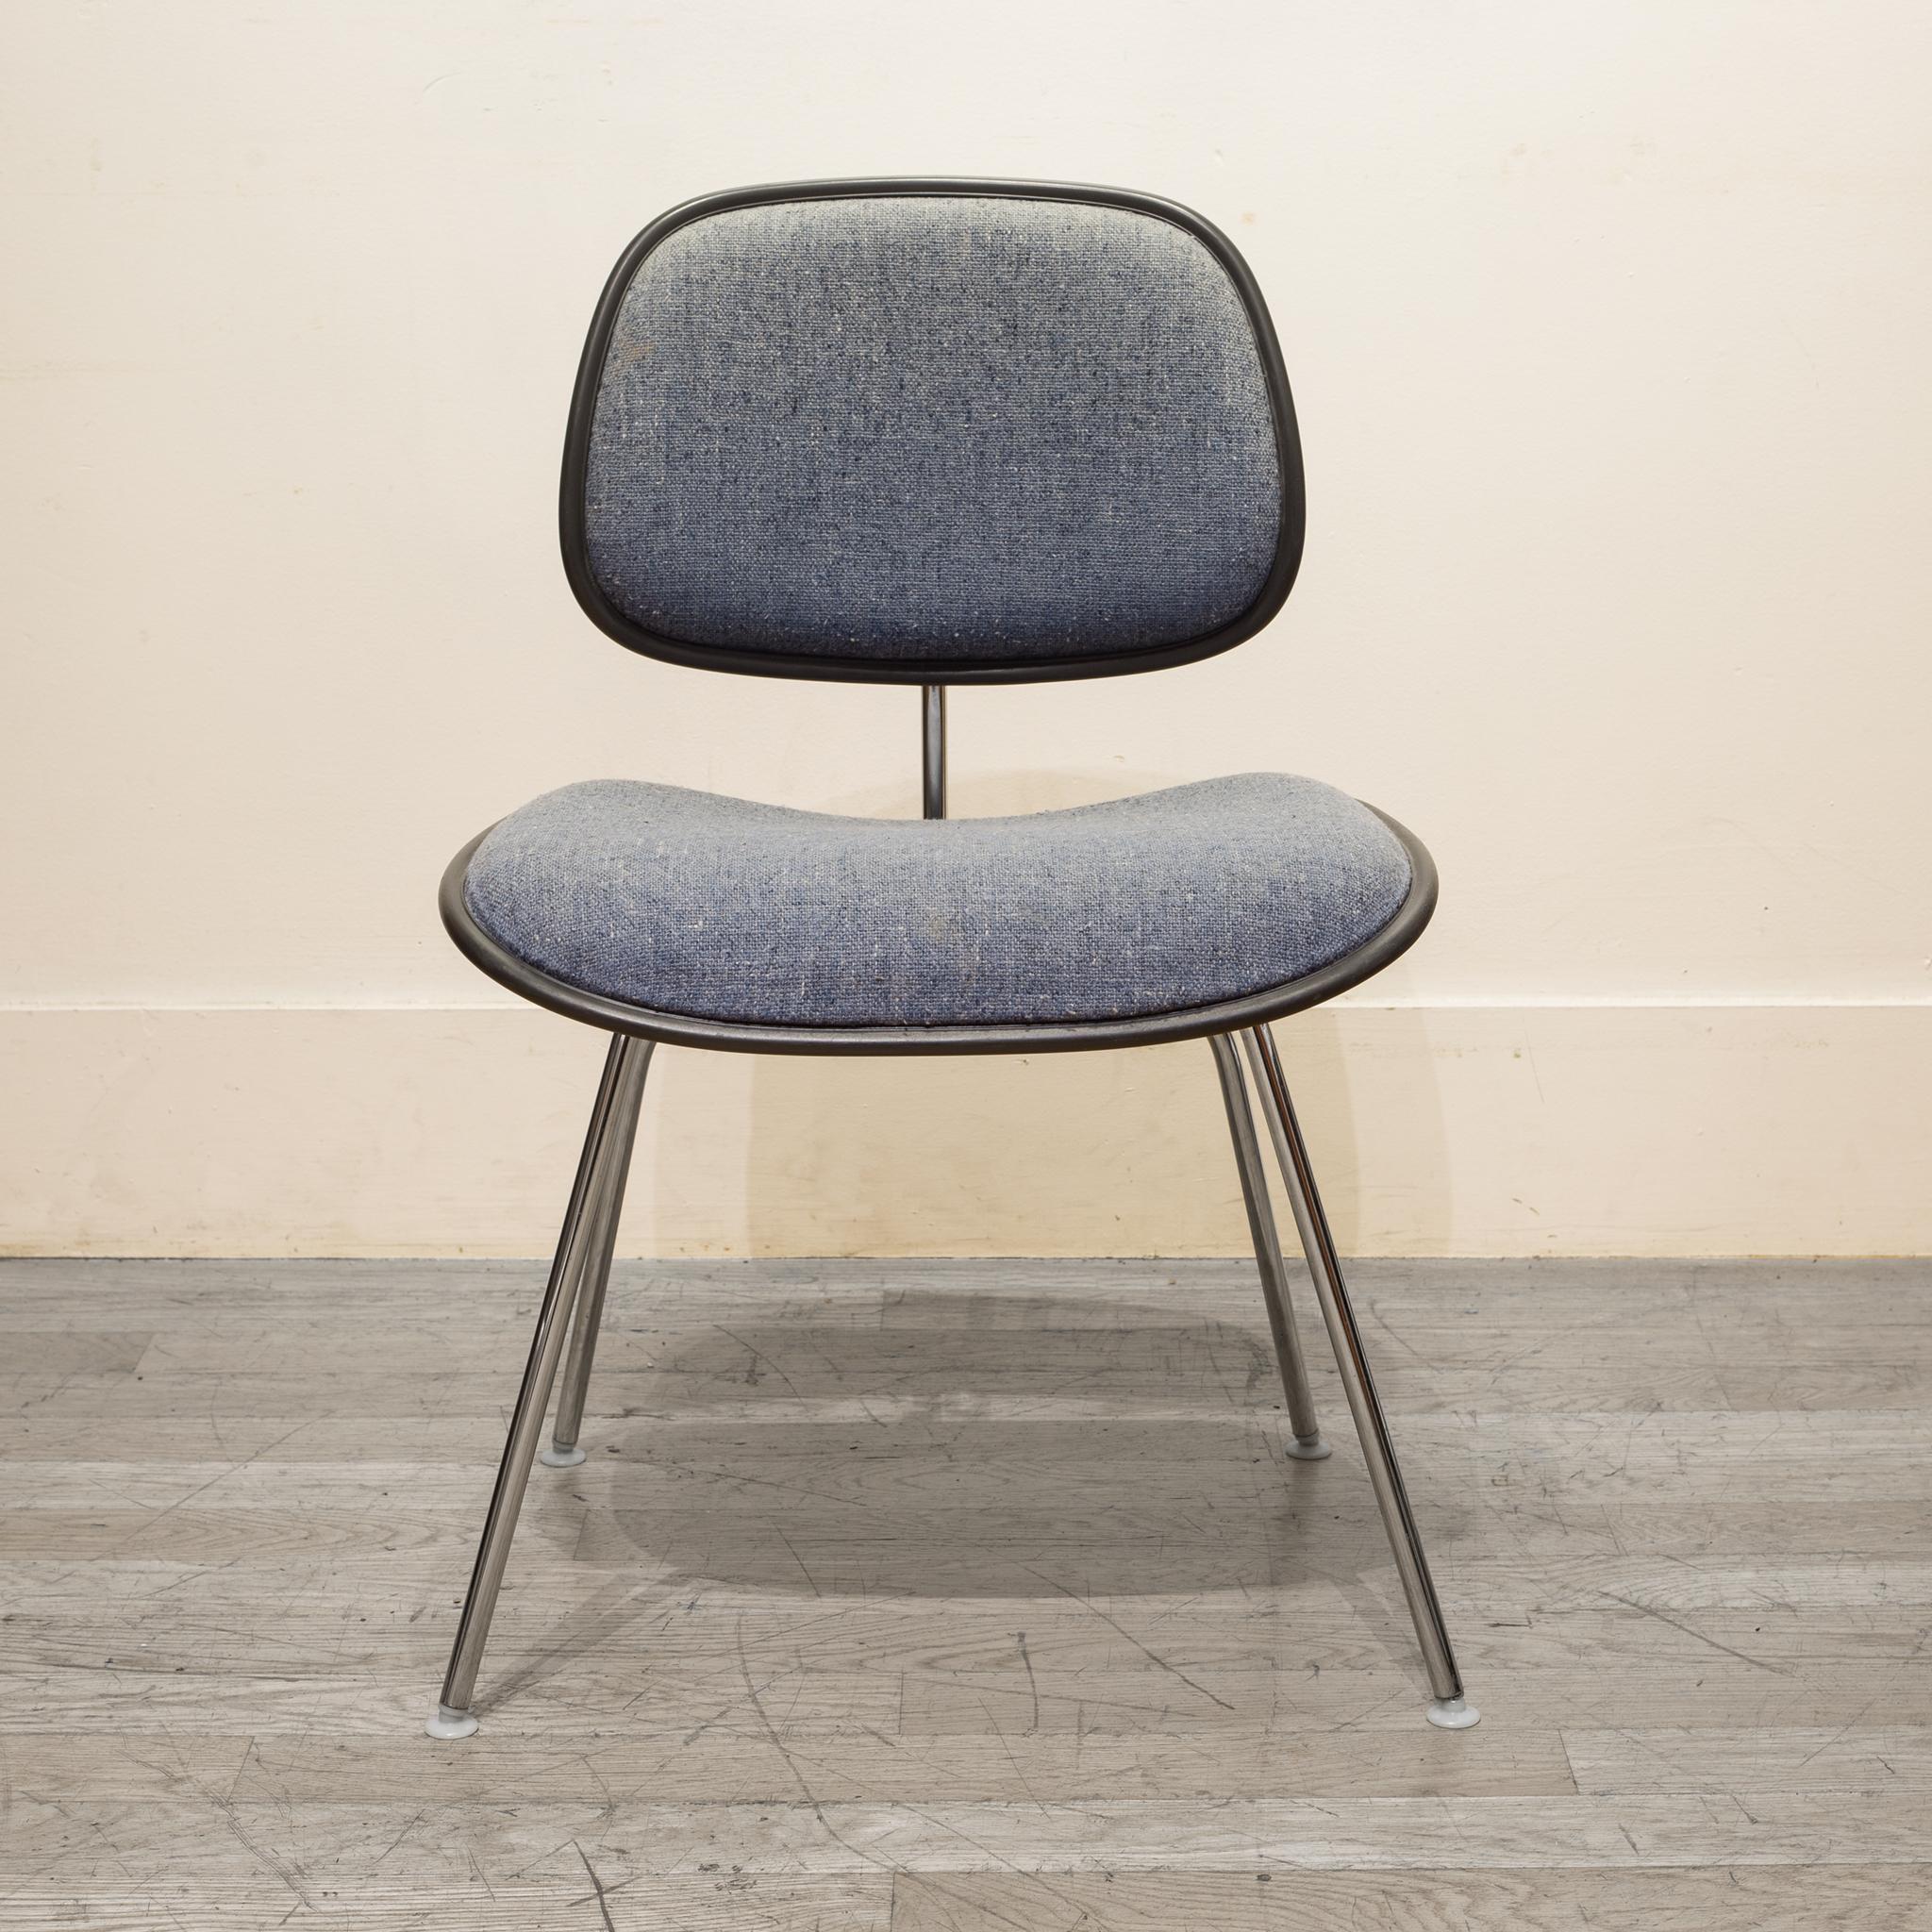 About

A EC-127 padded DCM chair by Charles Eames for Herman Miller. The padded seat and backrest are upholstered in light blue fabric with specs of dark blue and white. Grey vinyl piping with chrome plated frame and original Herman Miller